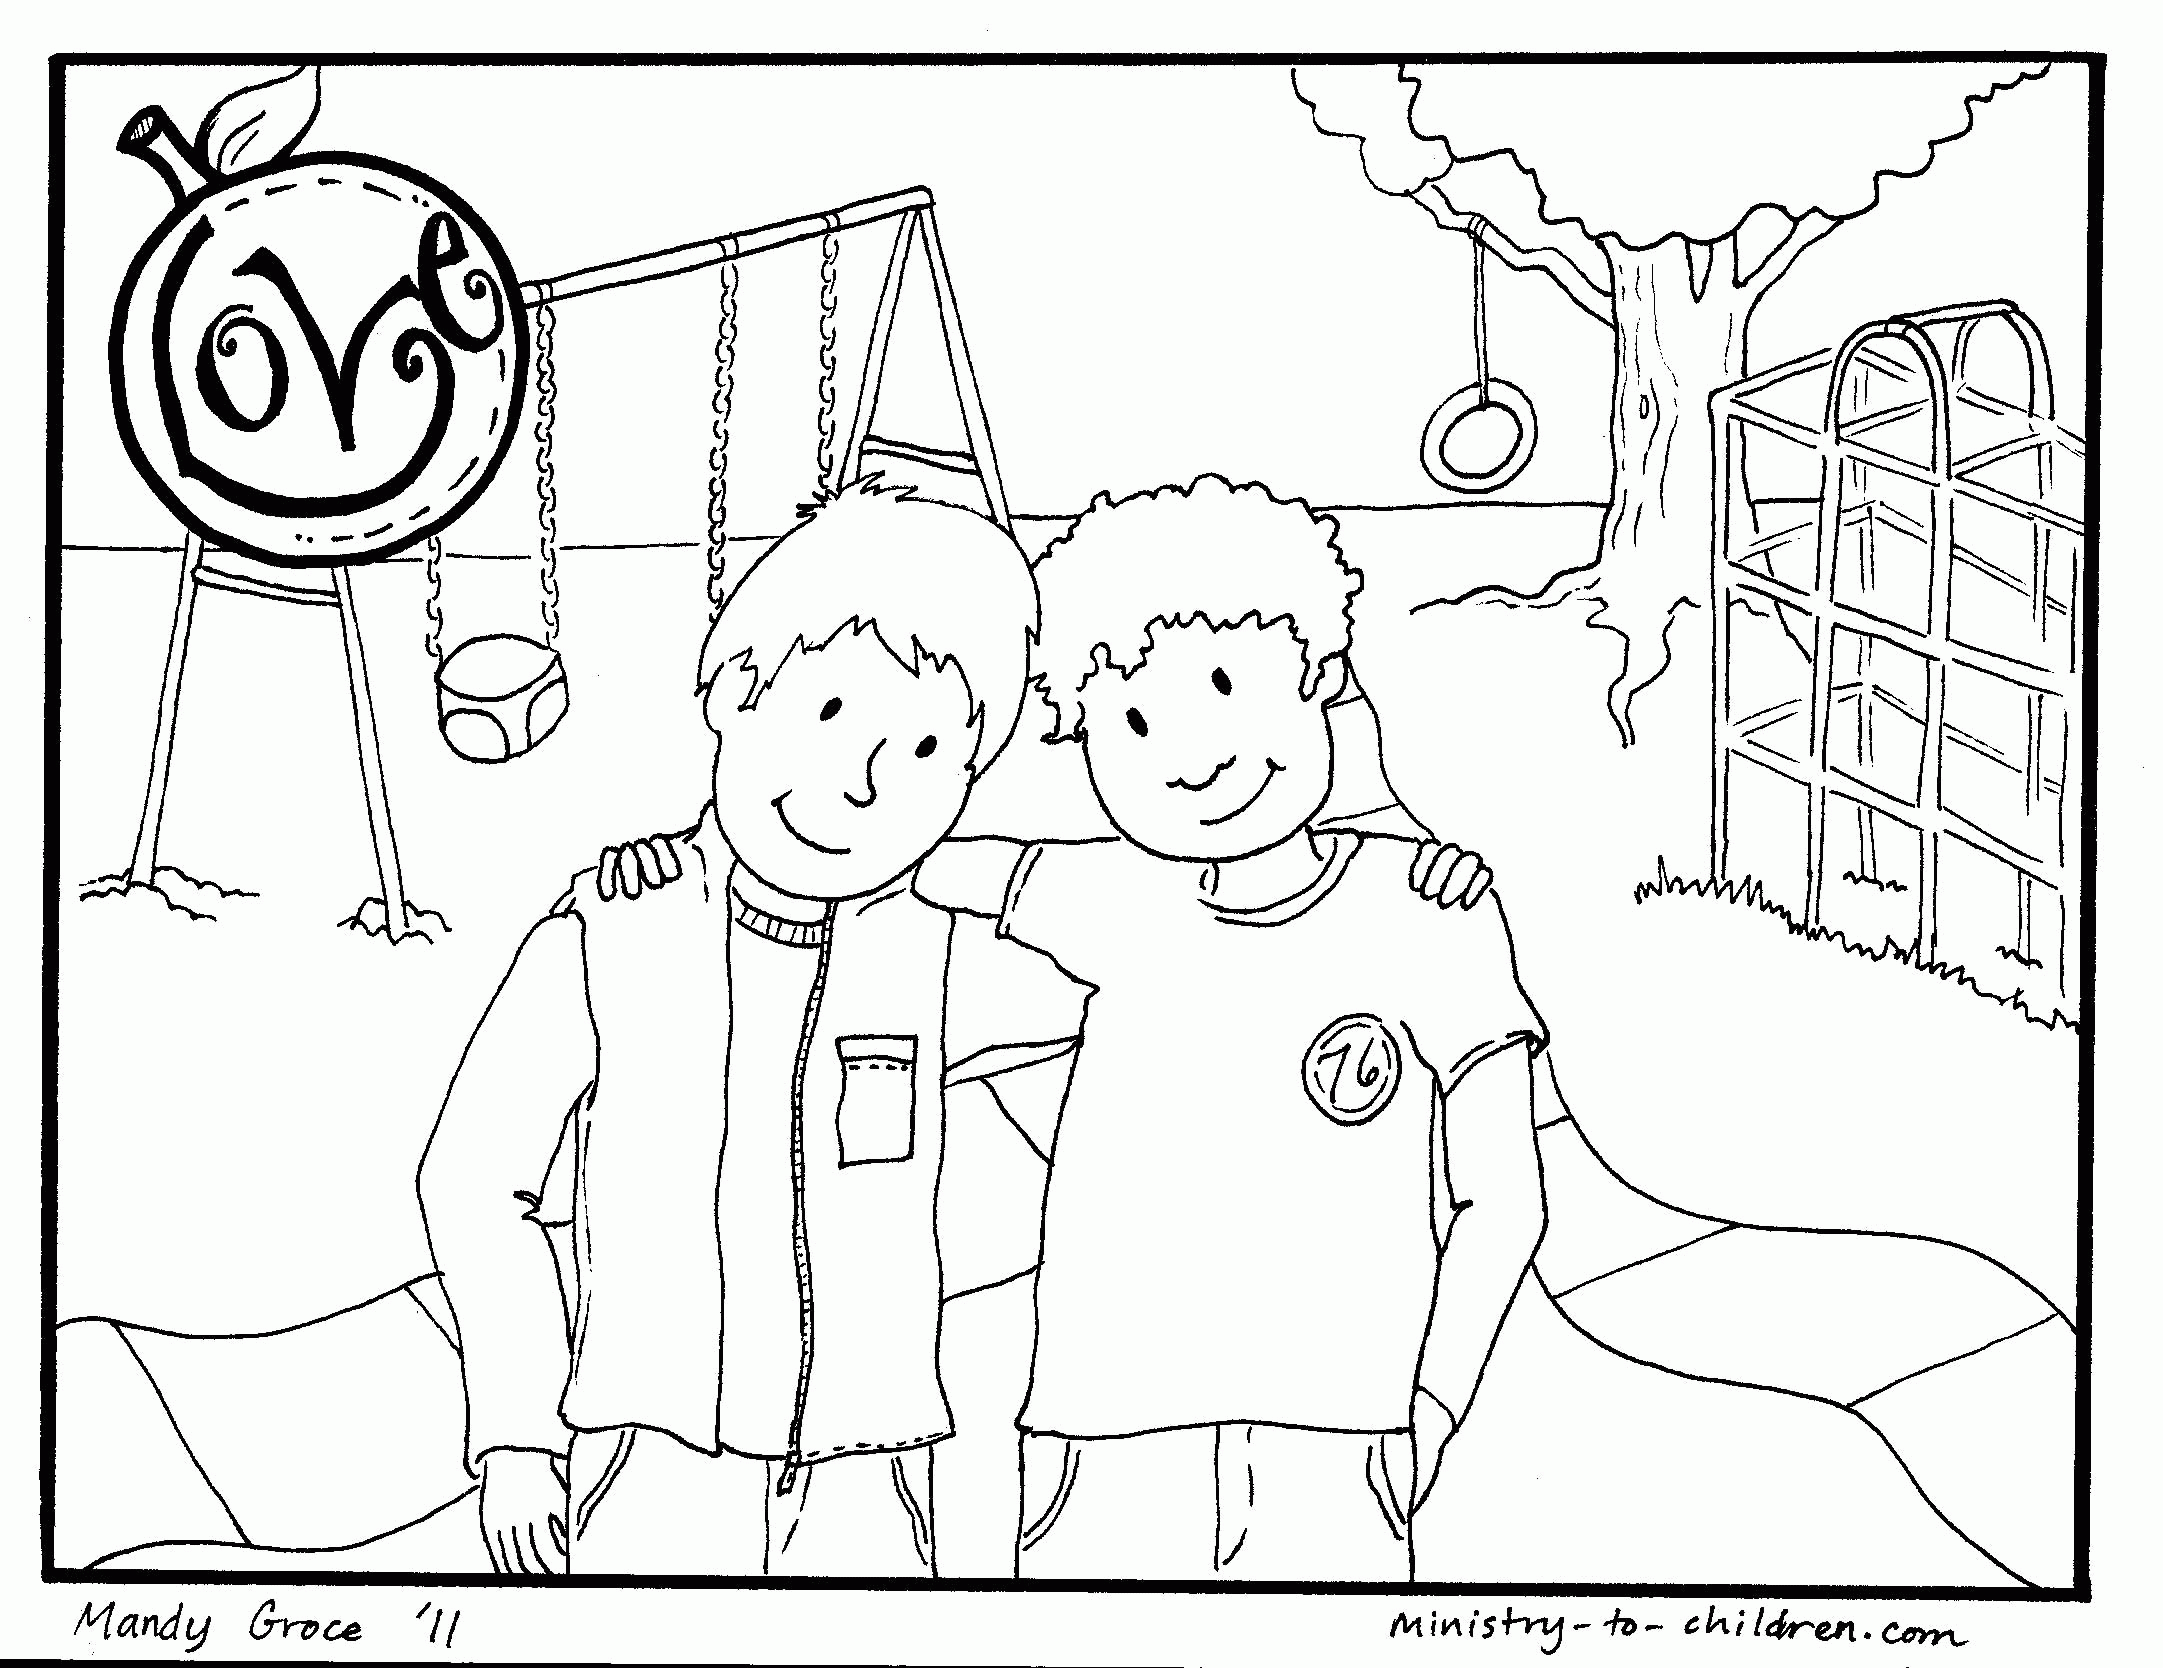 Love Coloring Page for Kids (Fruit of the Spirit)